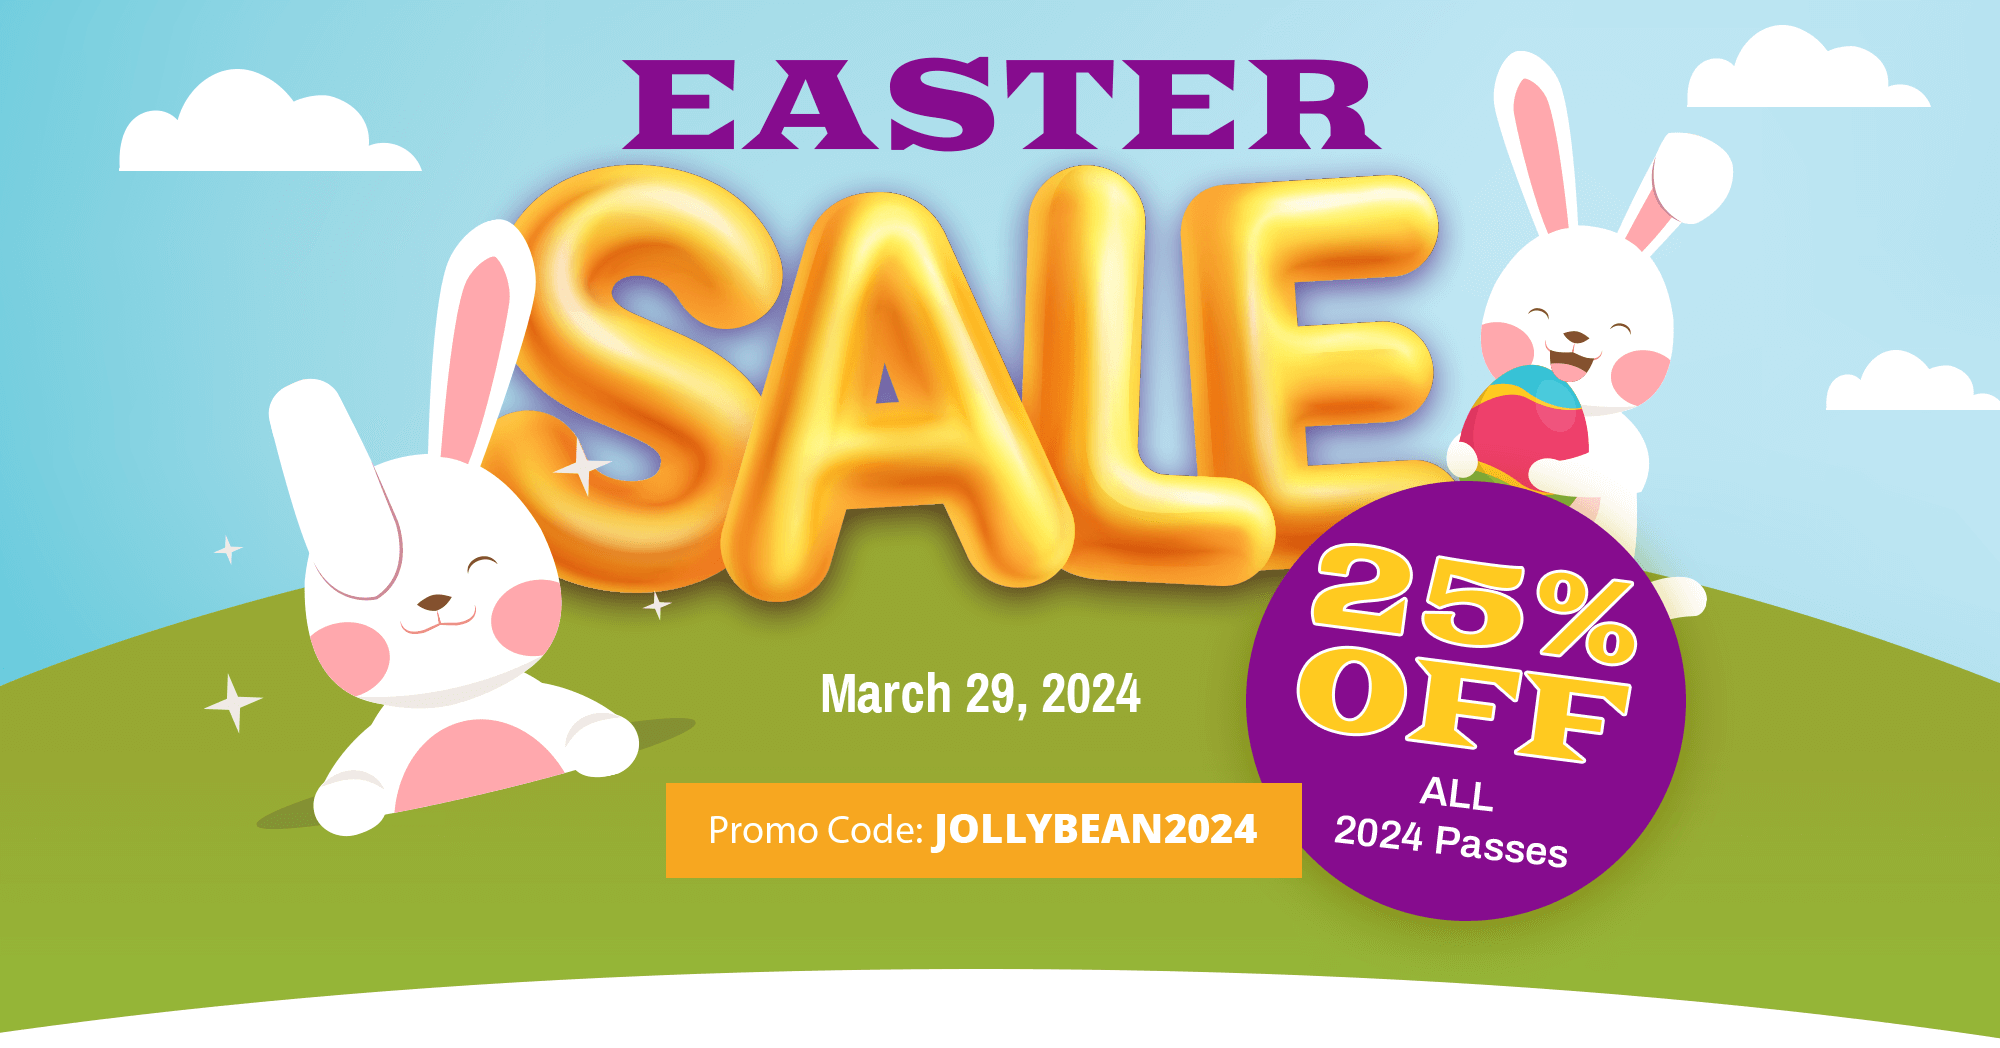 Easter Sale March 29, 2024 | 25% Off all 2024 Passes | Promo Code: JOLLYBEAN2024